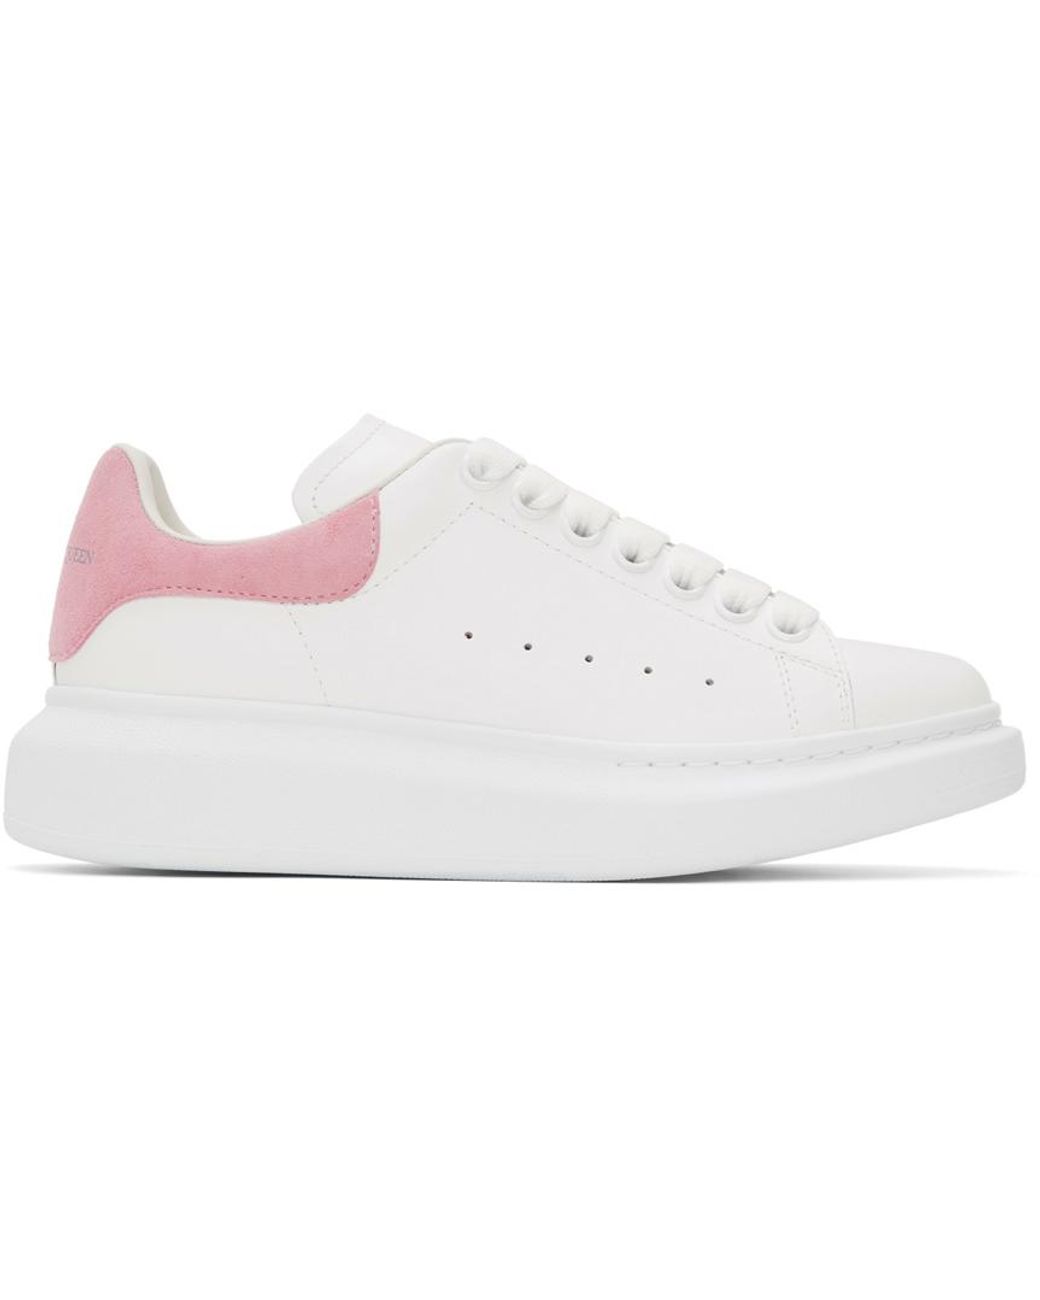 Alexander McQueen Leather Ssense Exclusive White & Pink Oversized ...